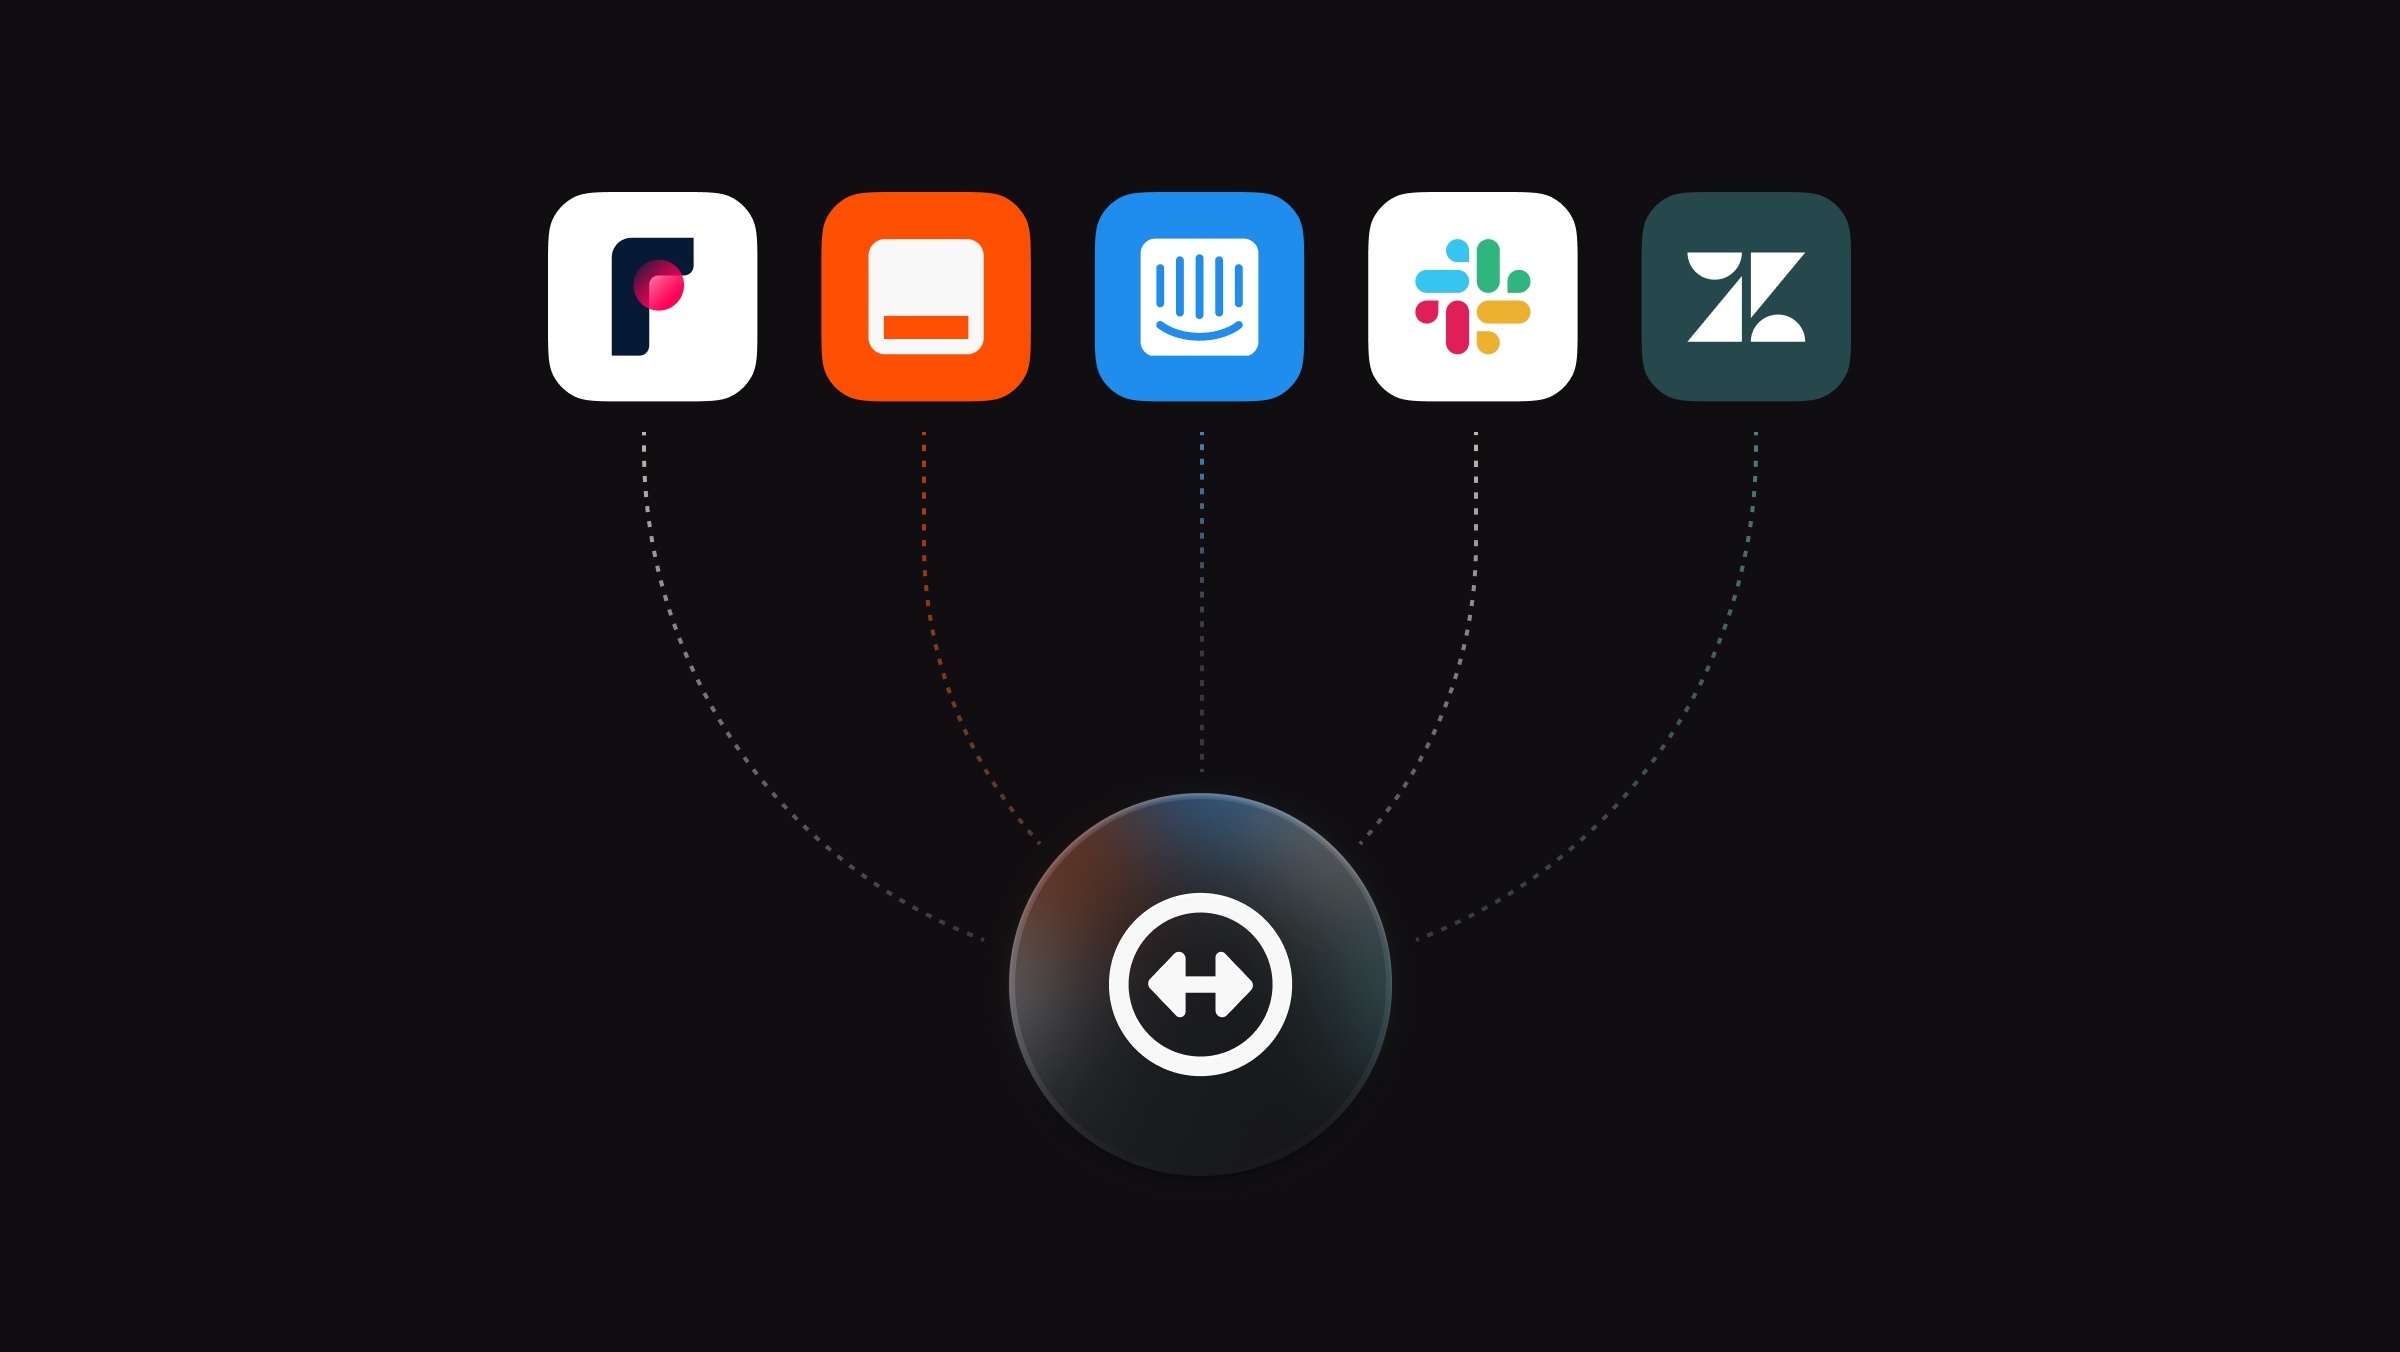 Icons for Front, Zapier, Intercom, Slack, and Zendesk connecting to Linear's Triage icon.